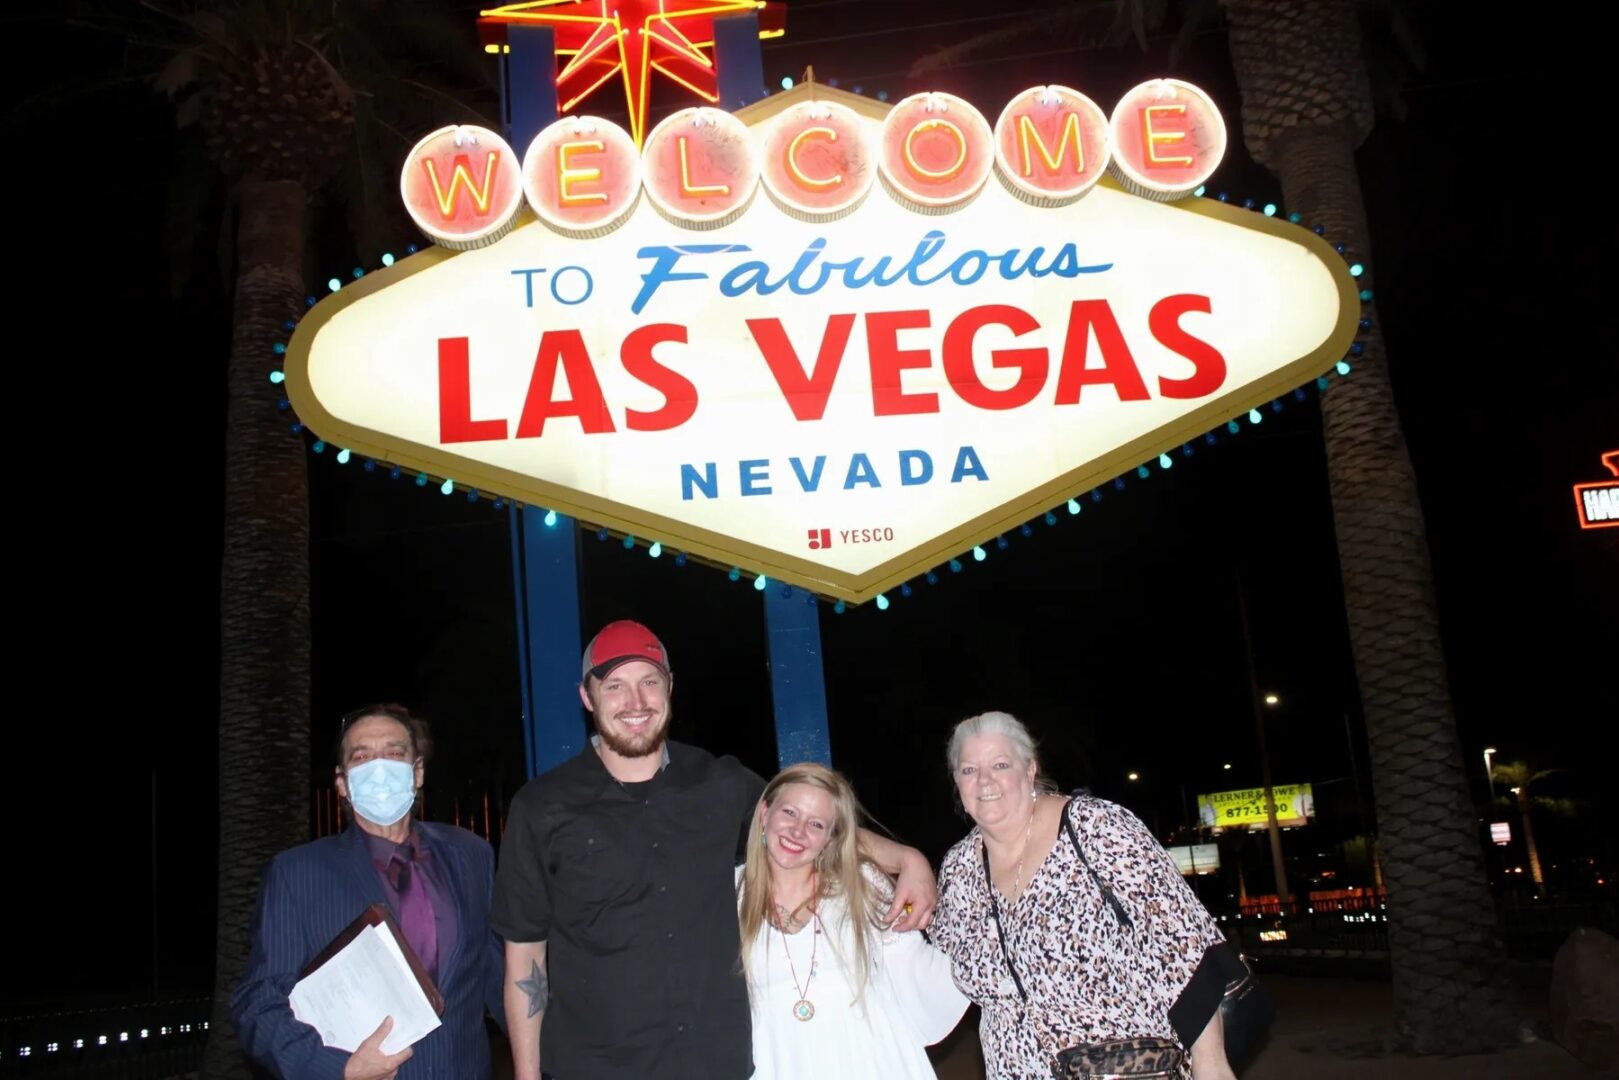 A group of people standing in front of the las vegas sign.